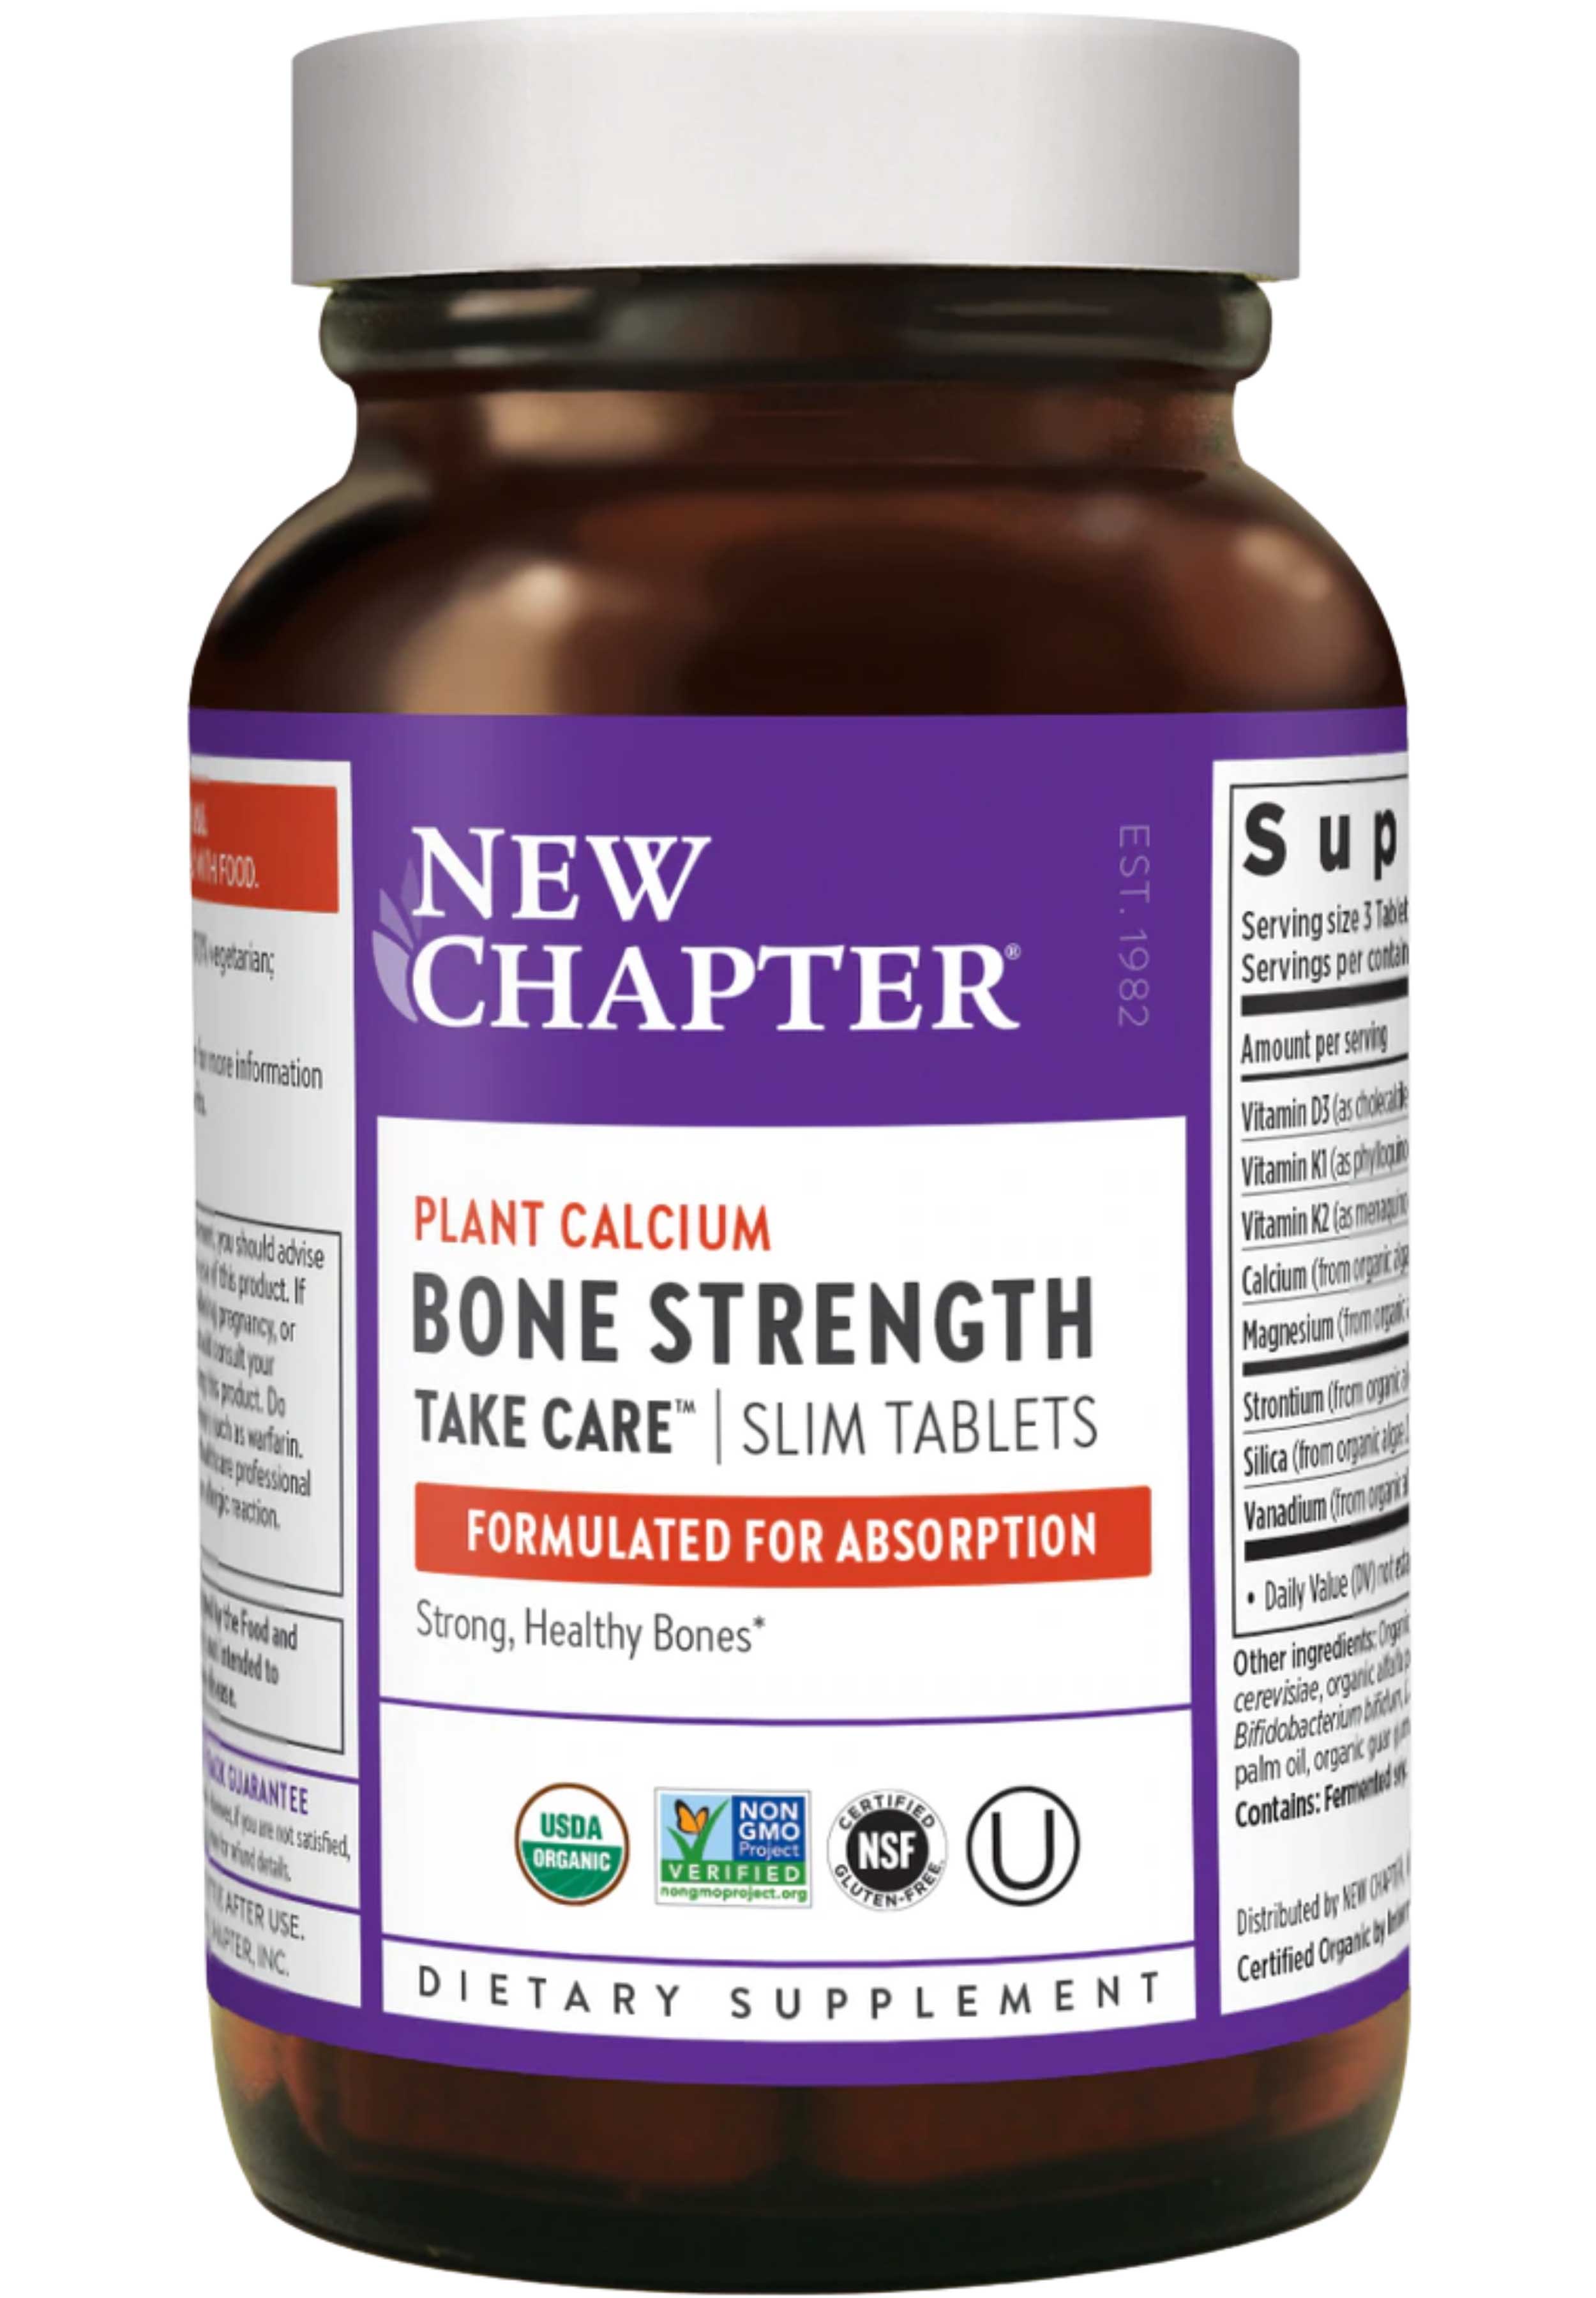 New Chapter Bone Strength Take Care